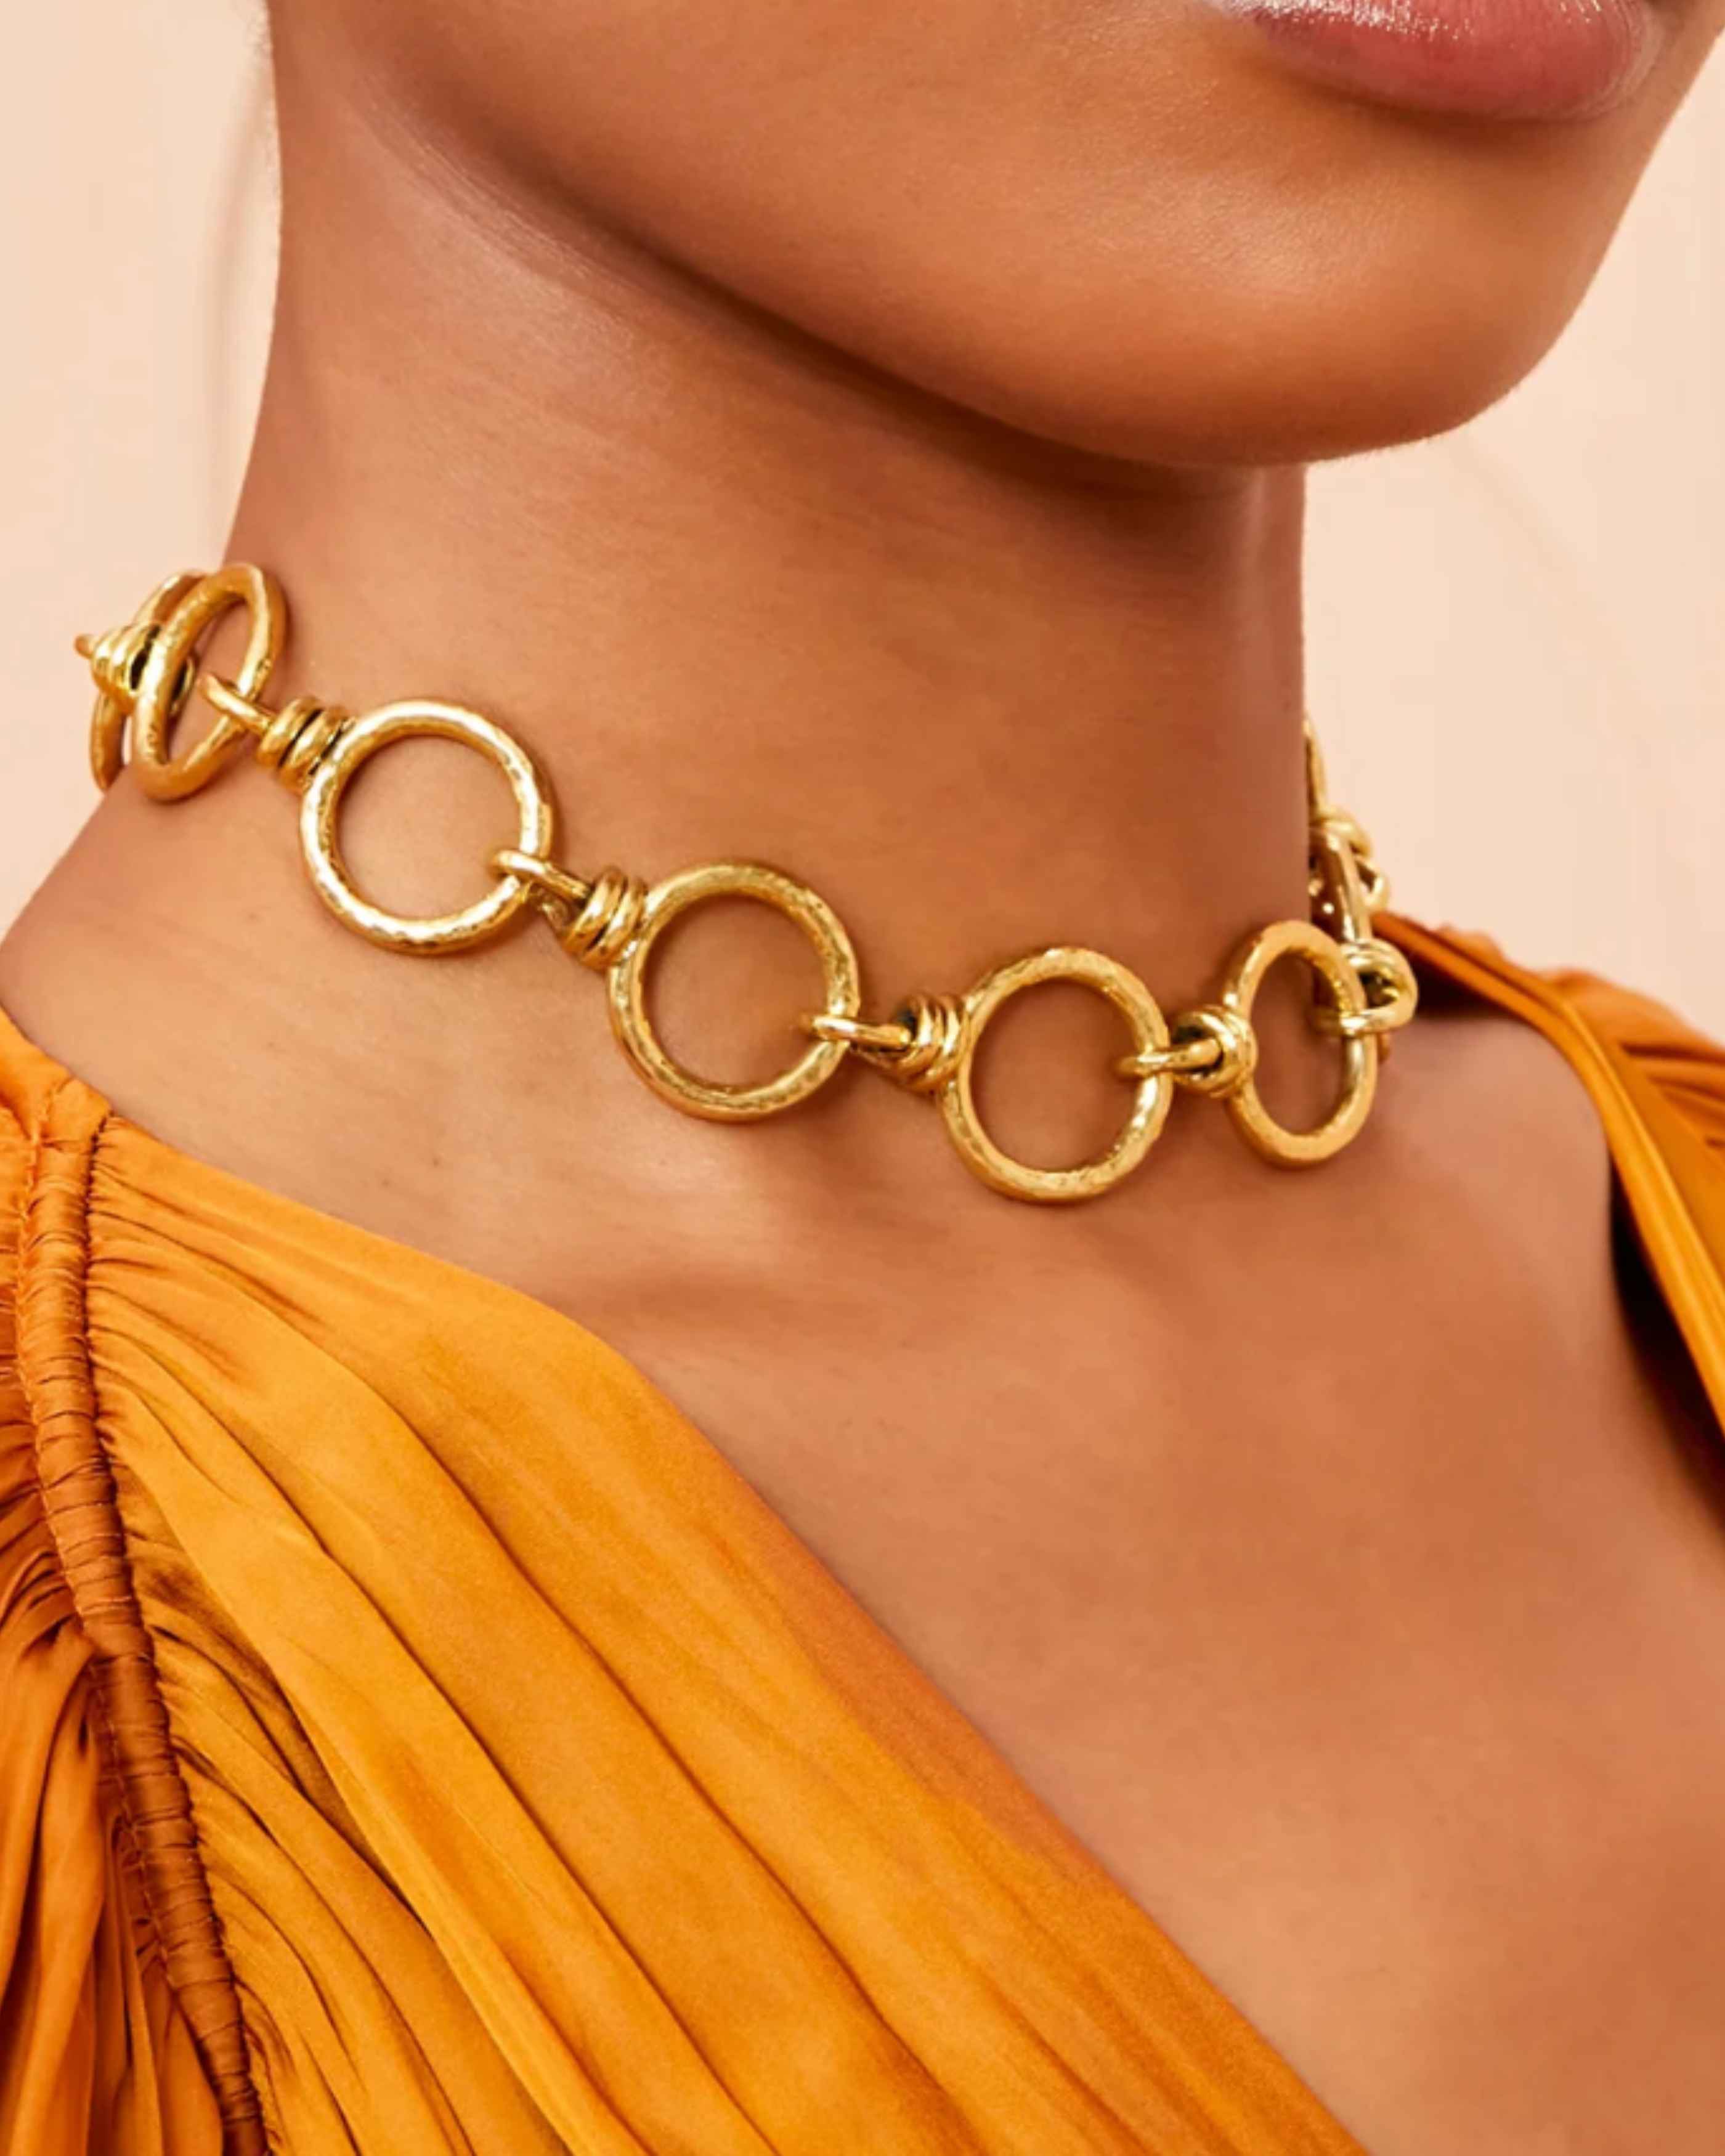 Ulla Johnson Hammered Circle Chain Necklace in Brass